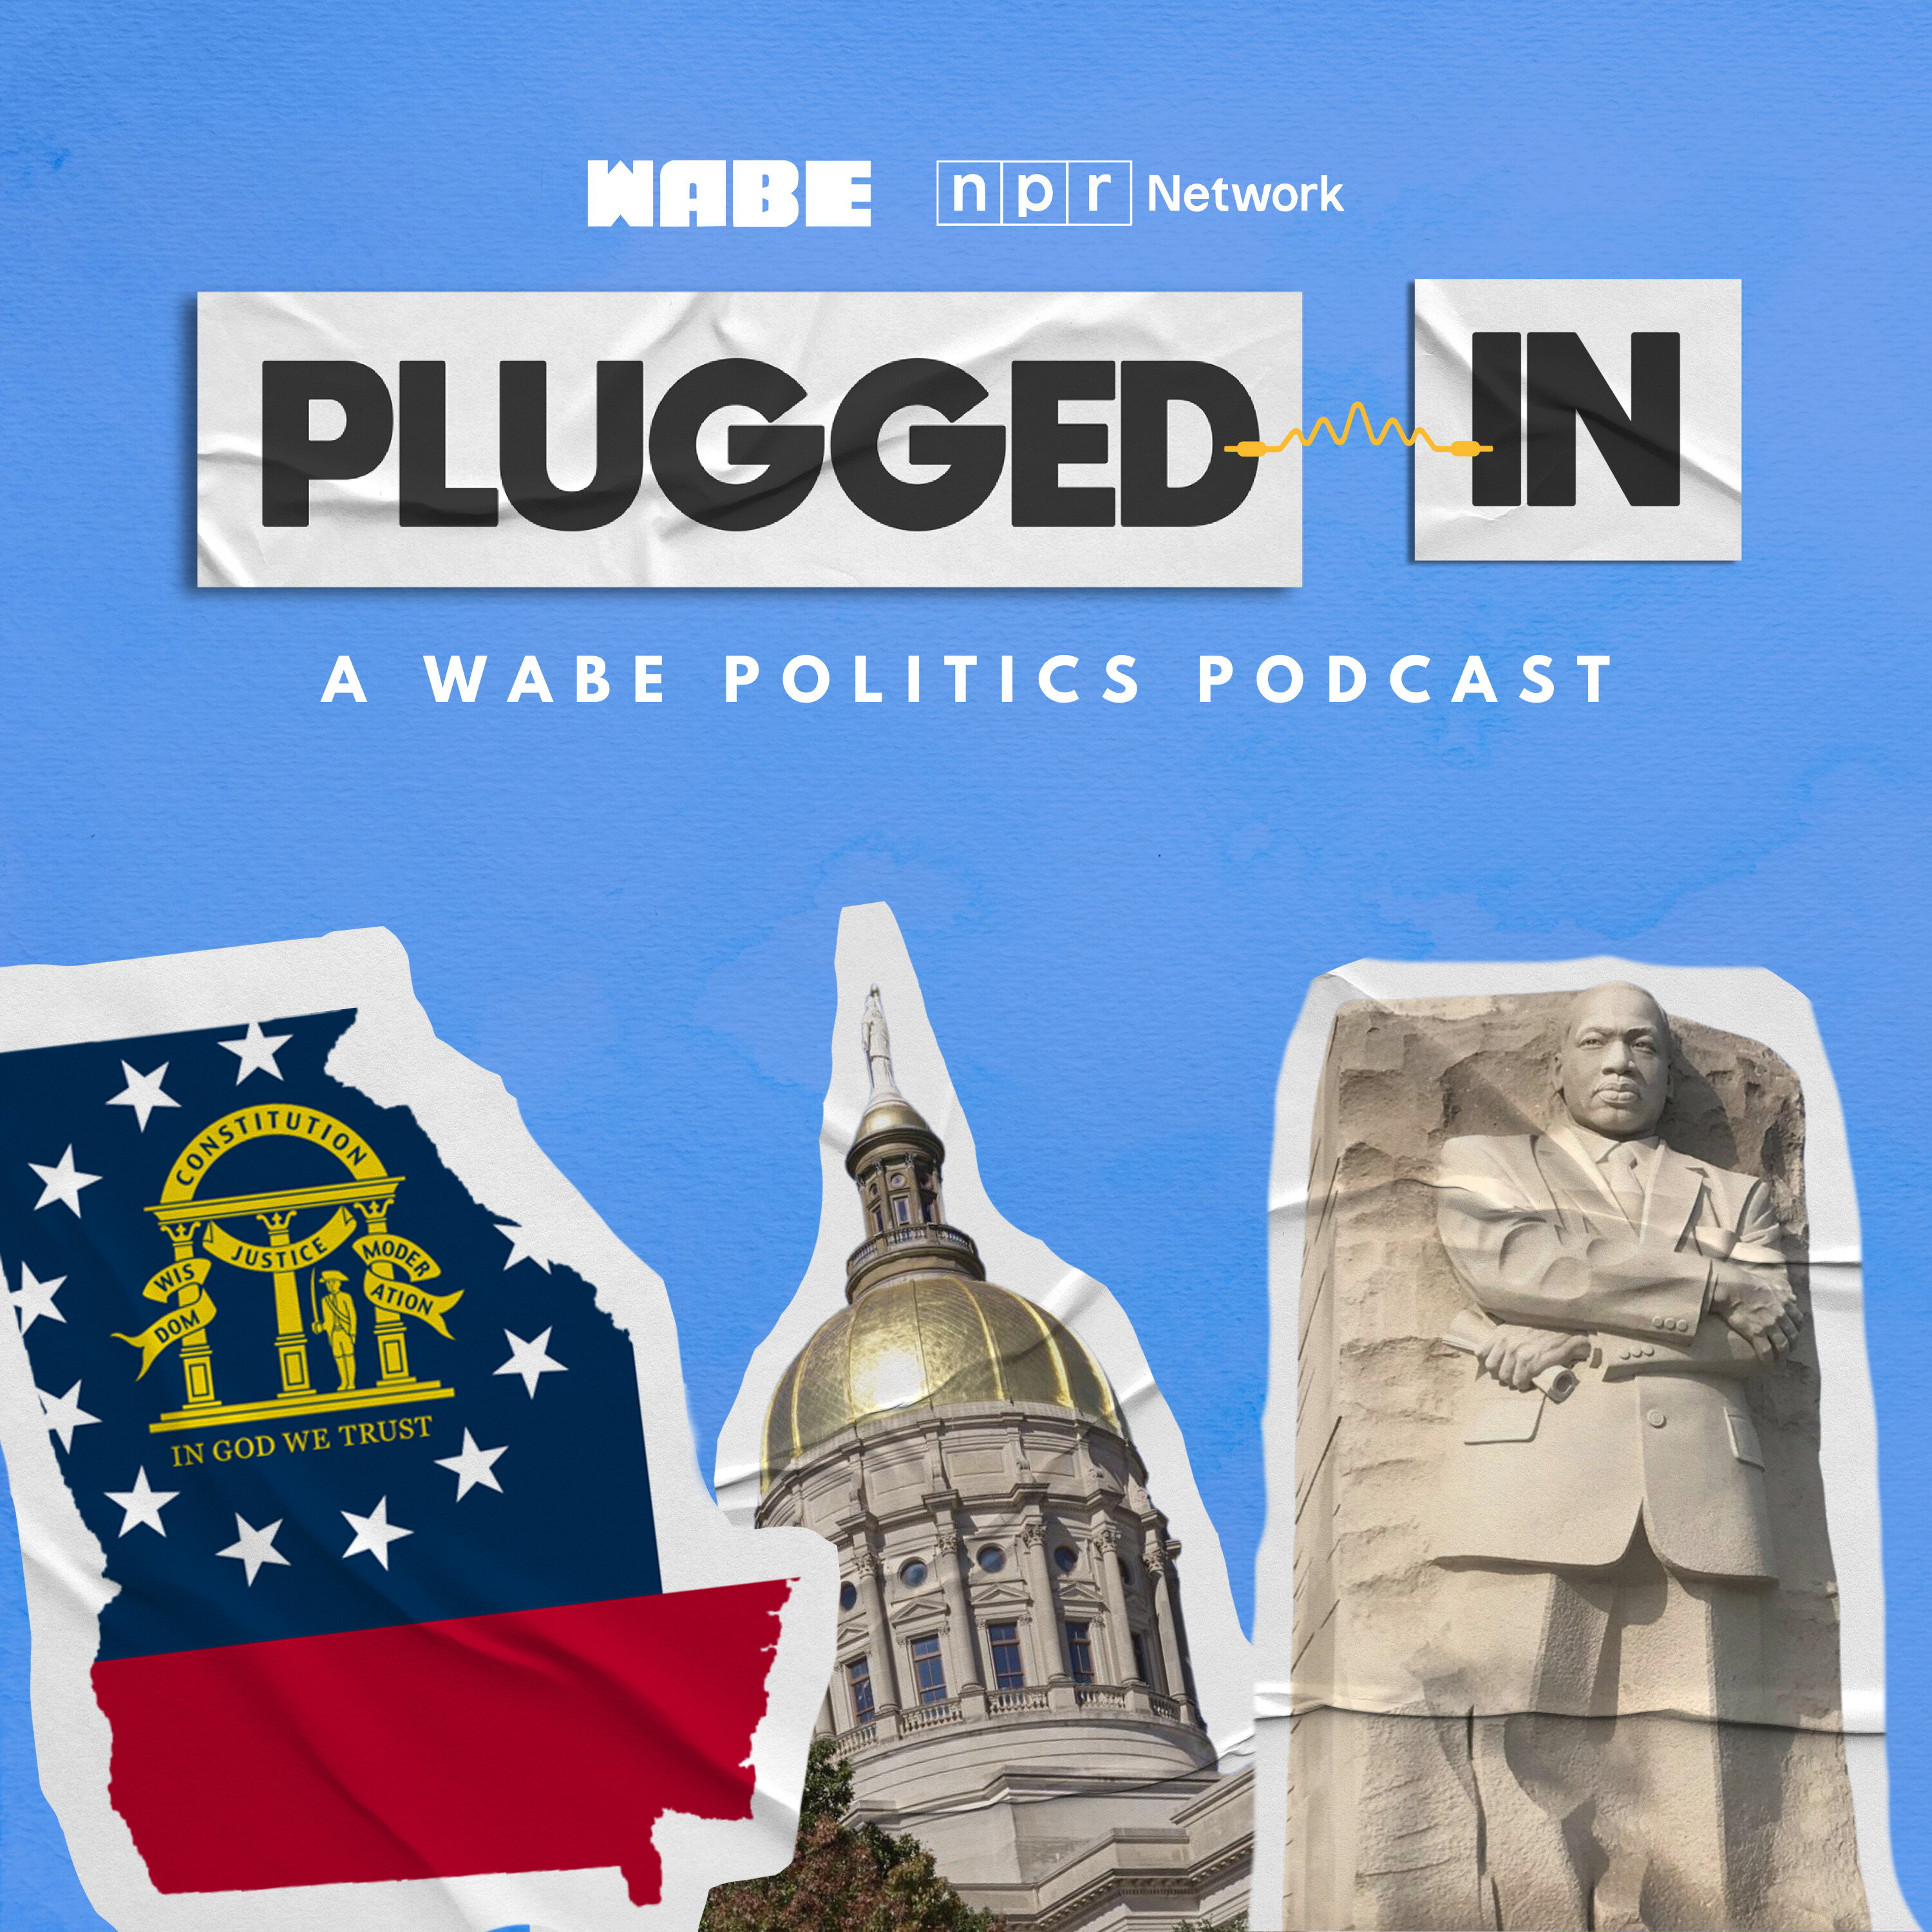 Introducing Plugged In: A WABE Politics Podcast